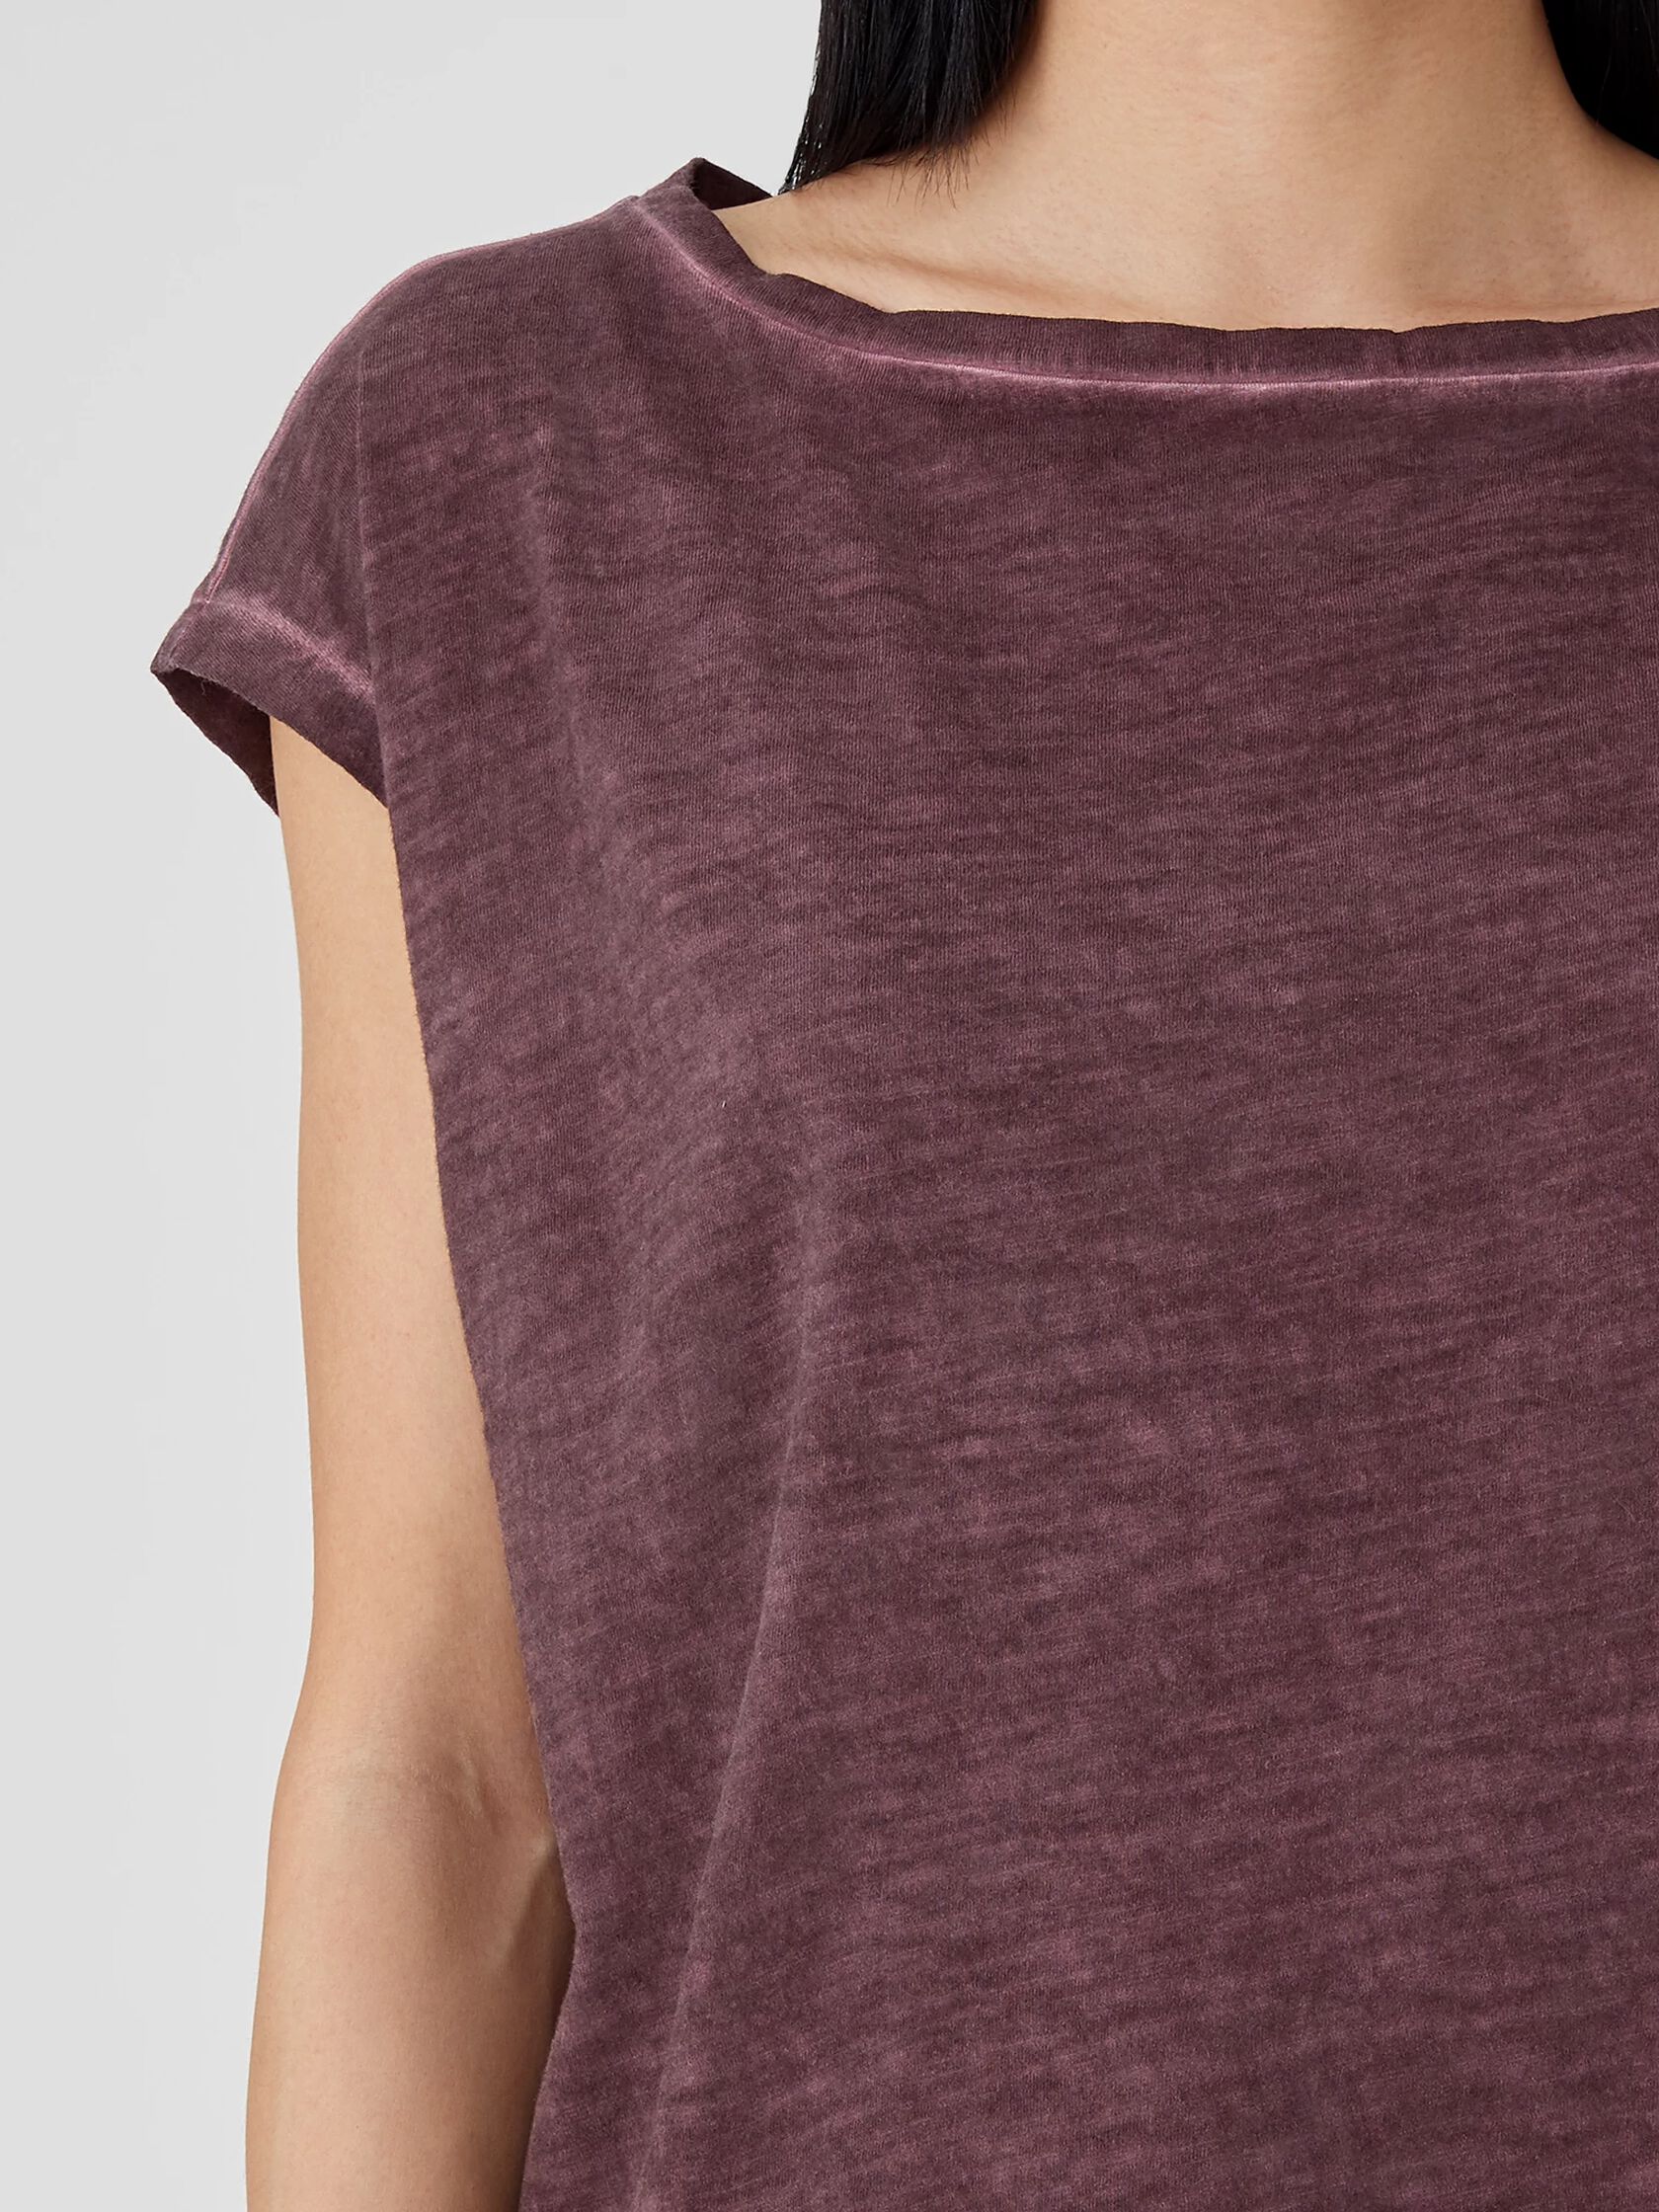 Pigment-Dyed Organic Cotton Square Top